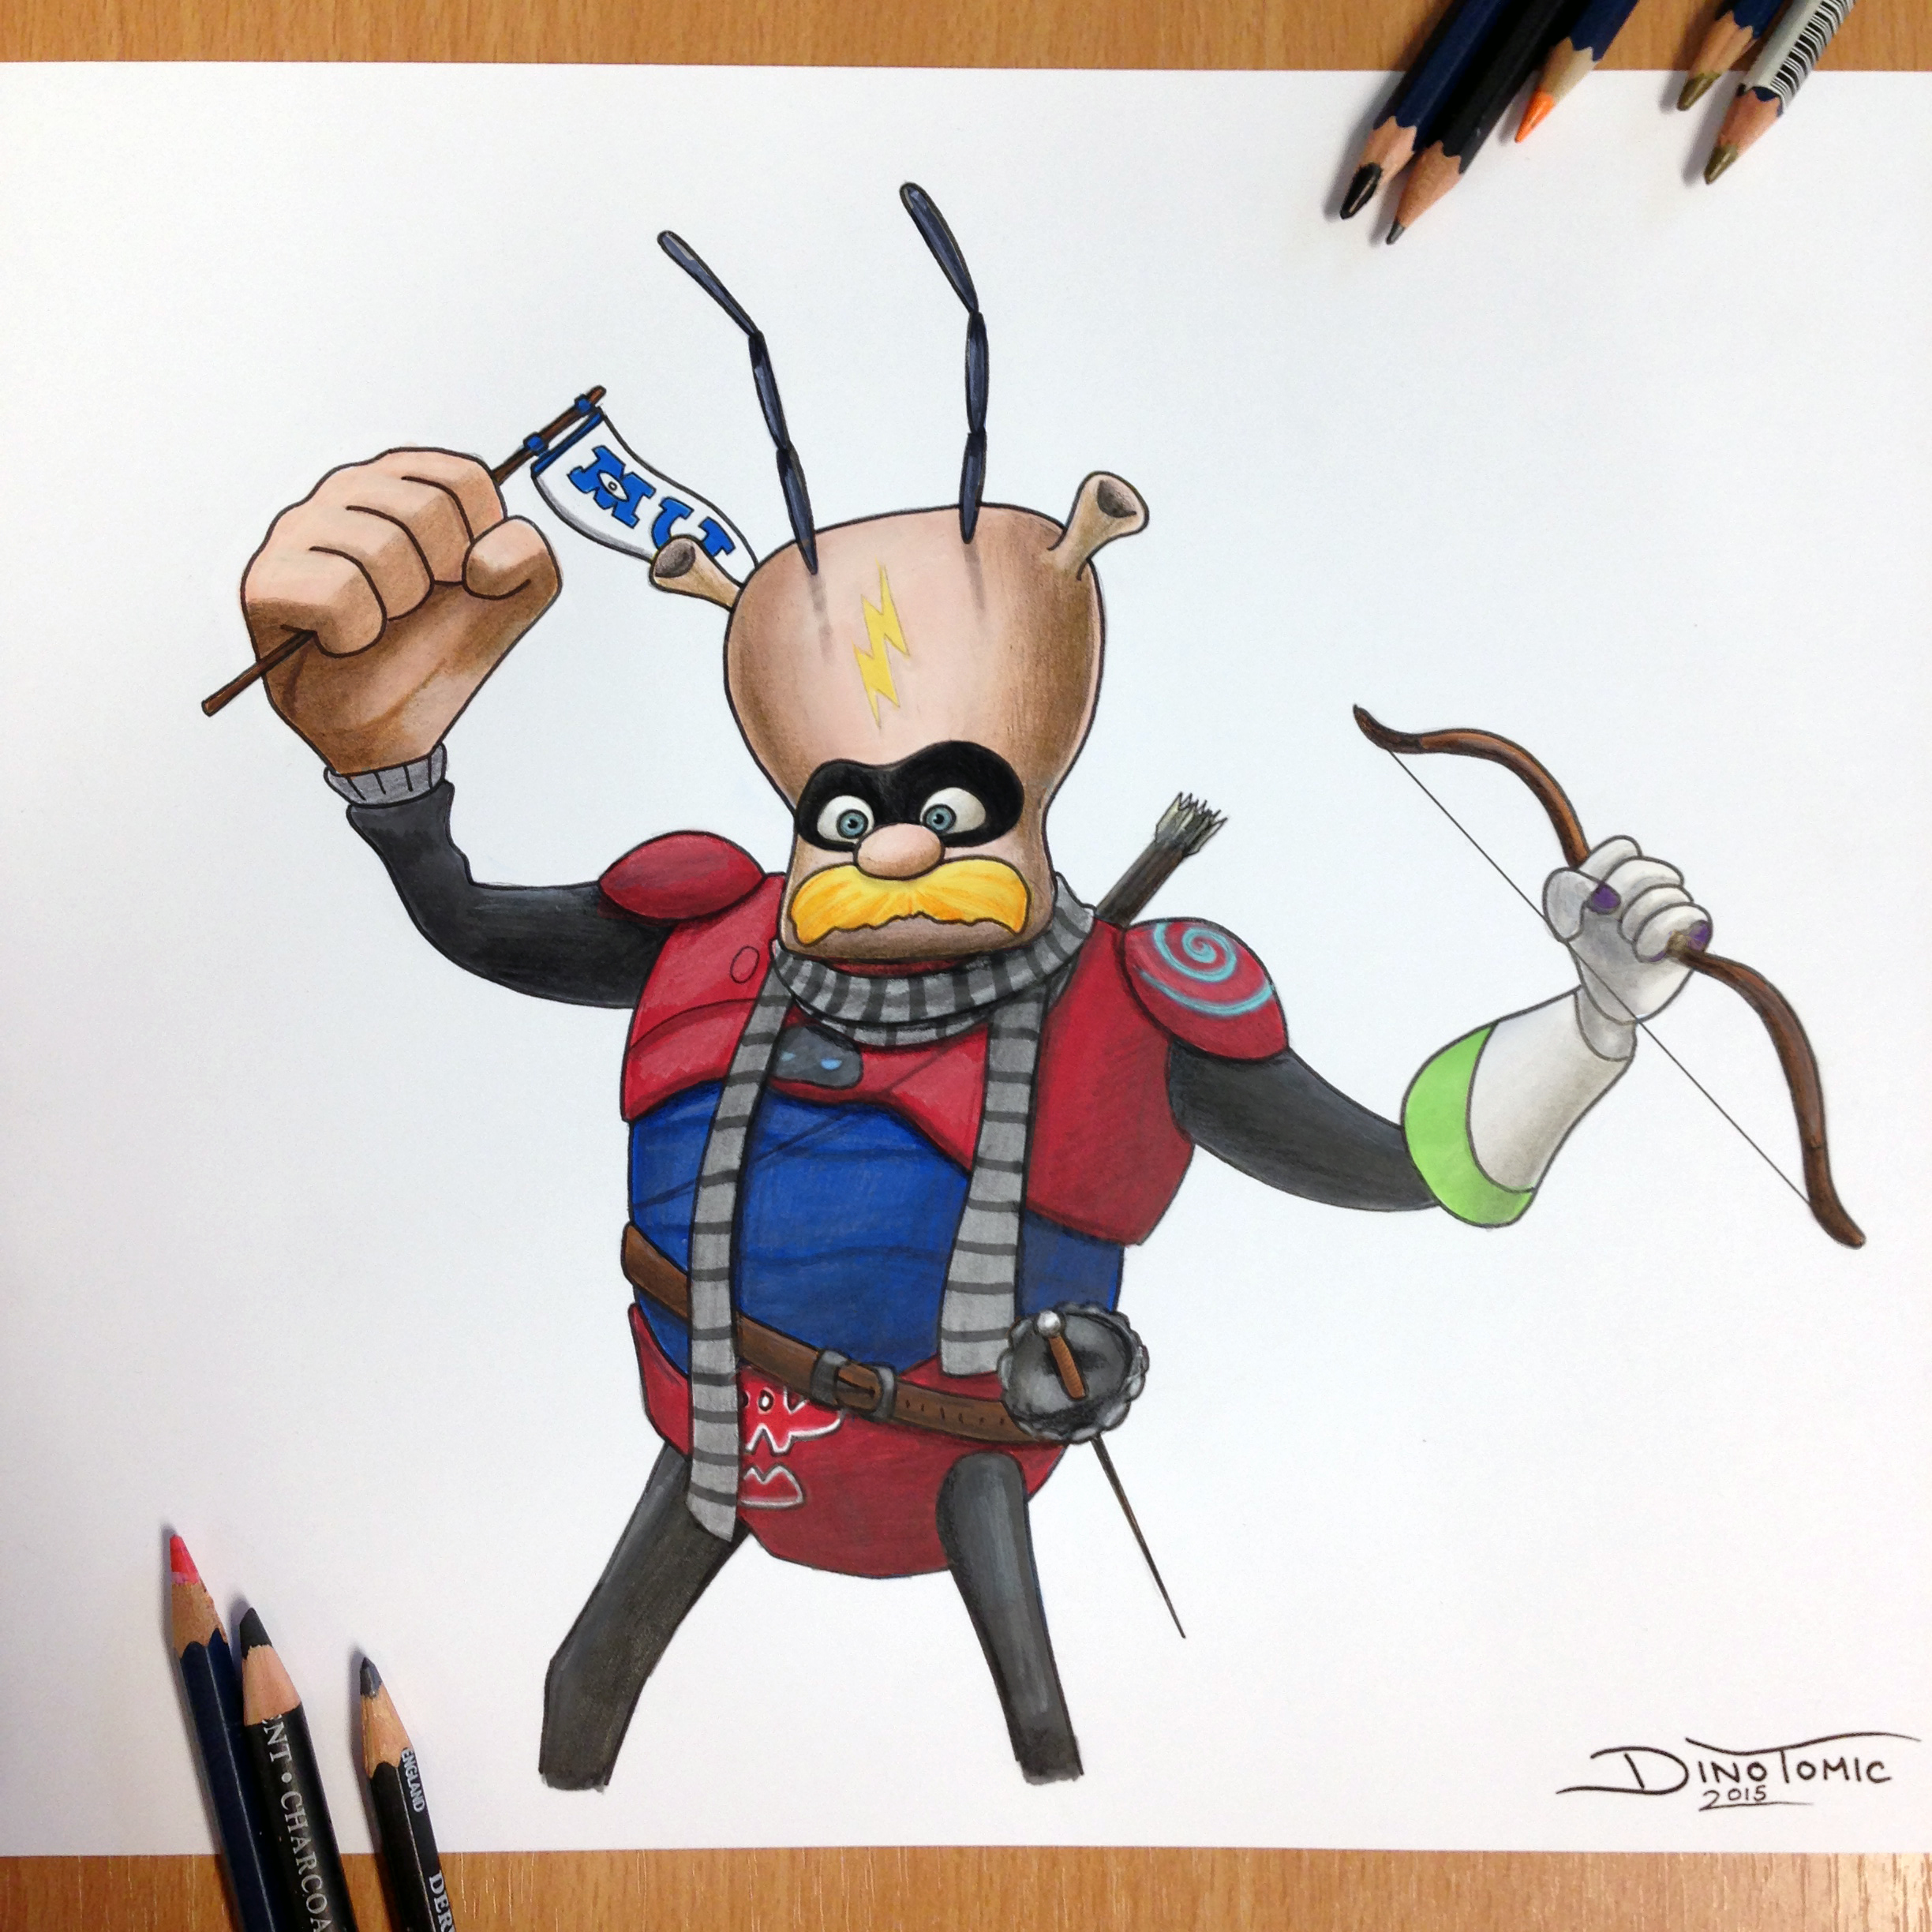 17 Cartoon Character Combined Pencil Drawing by AtomiccircuS on DeviantArt